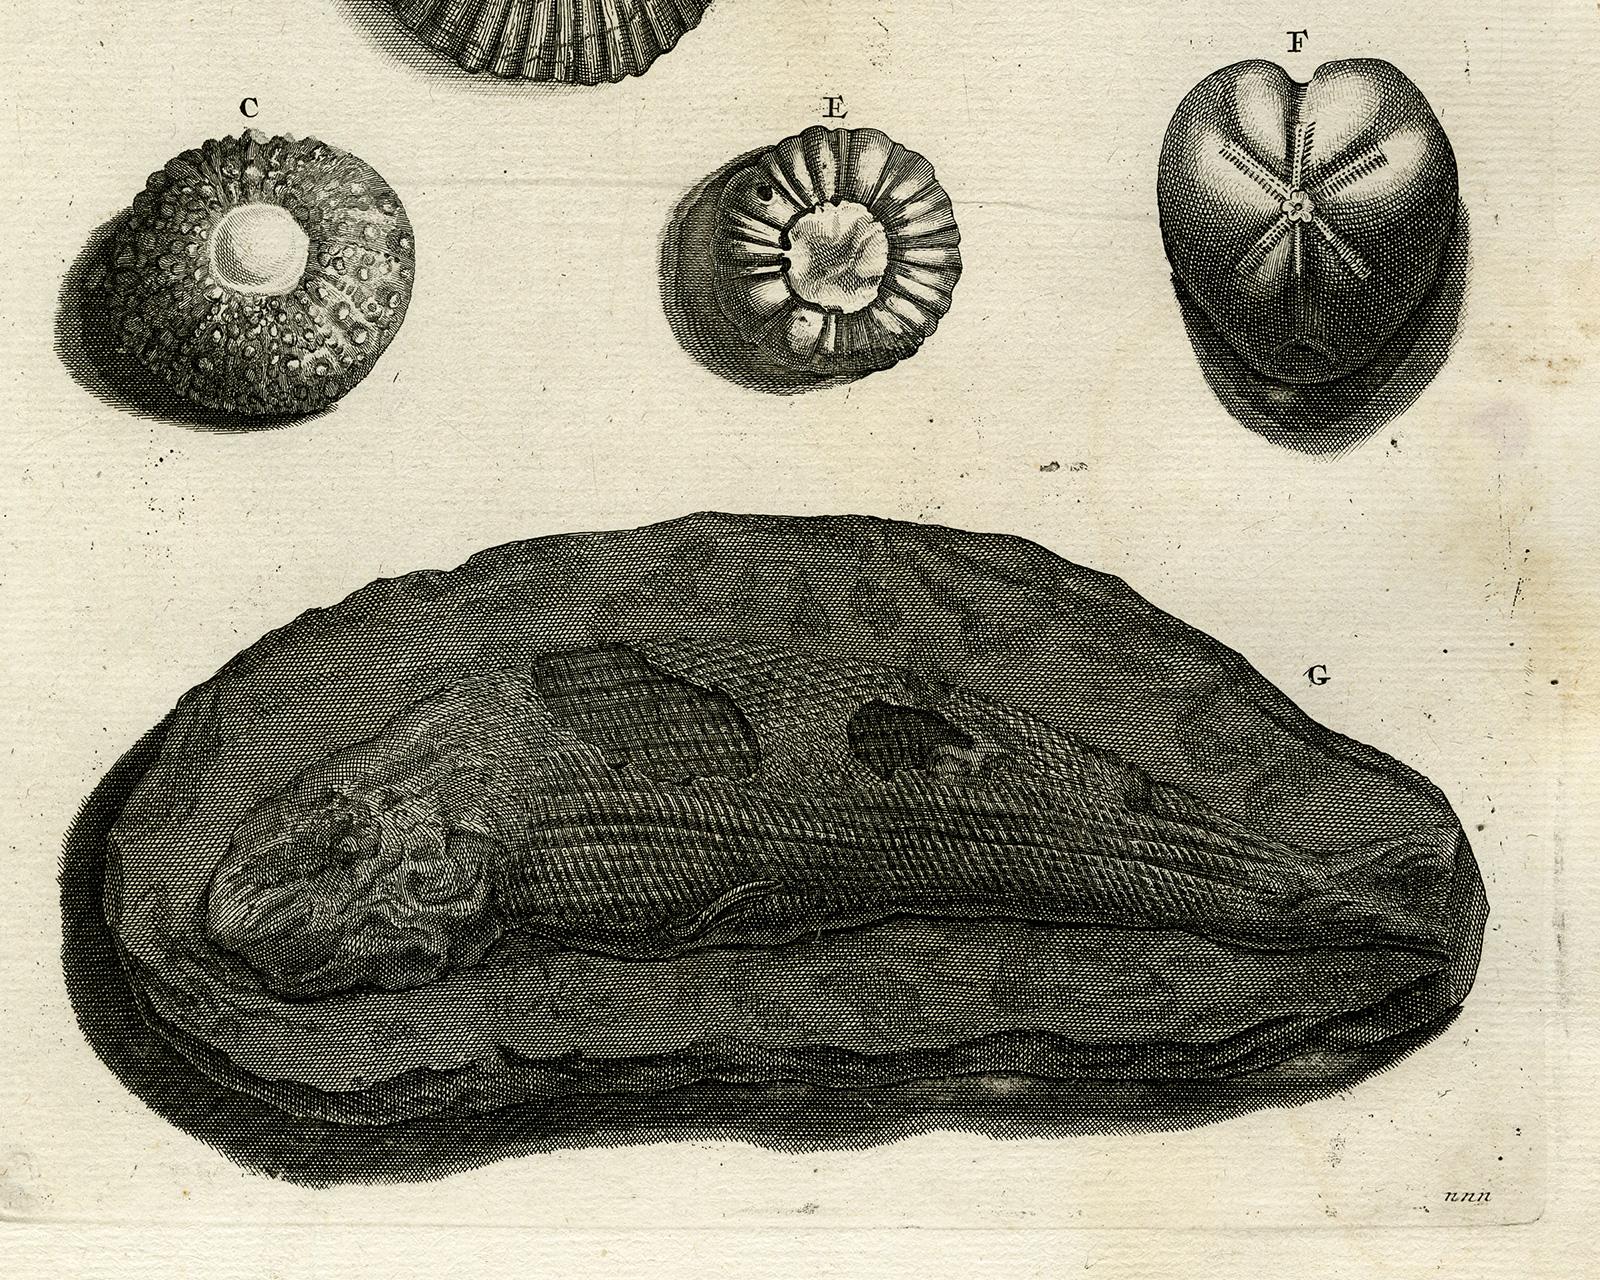 Fossilized shells and fish - Ambonian Cabinet of Curiosities - Rumphius - 18th c - Old Masters Print by Jorg Eberhardt Rumph